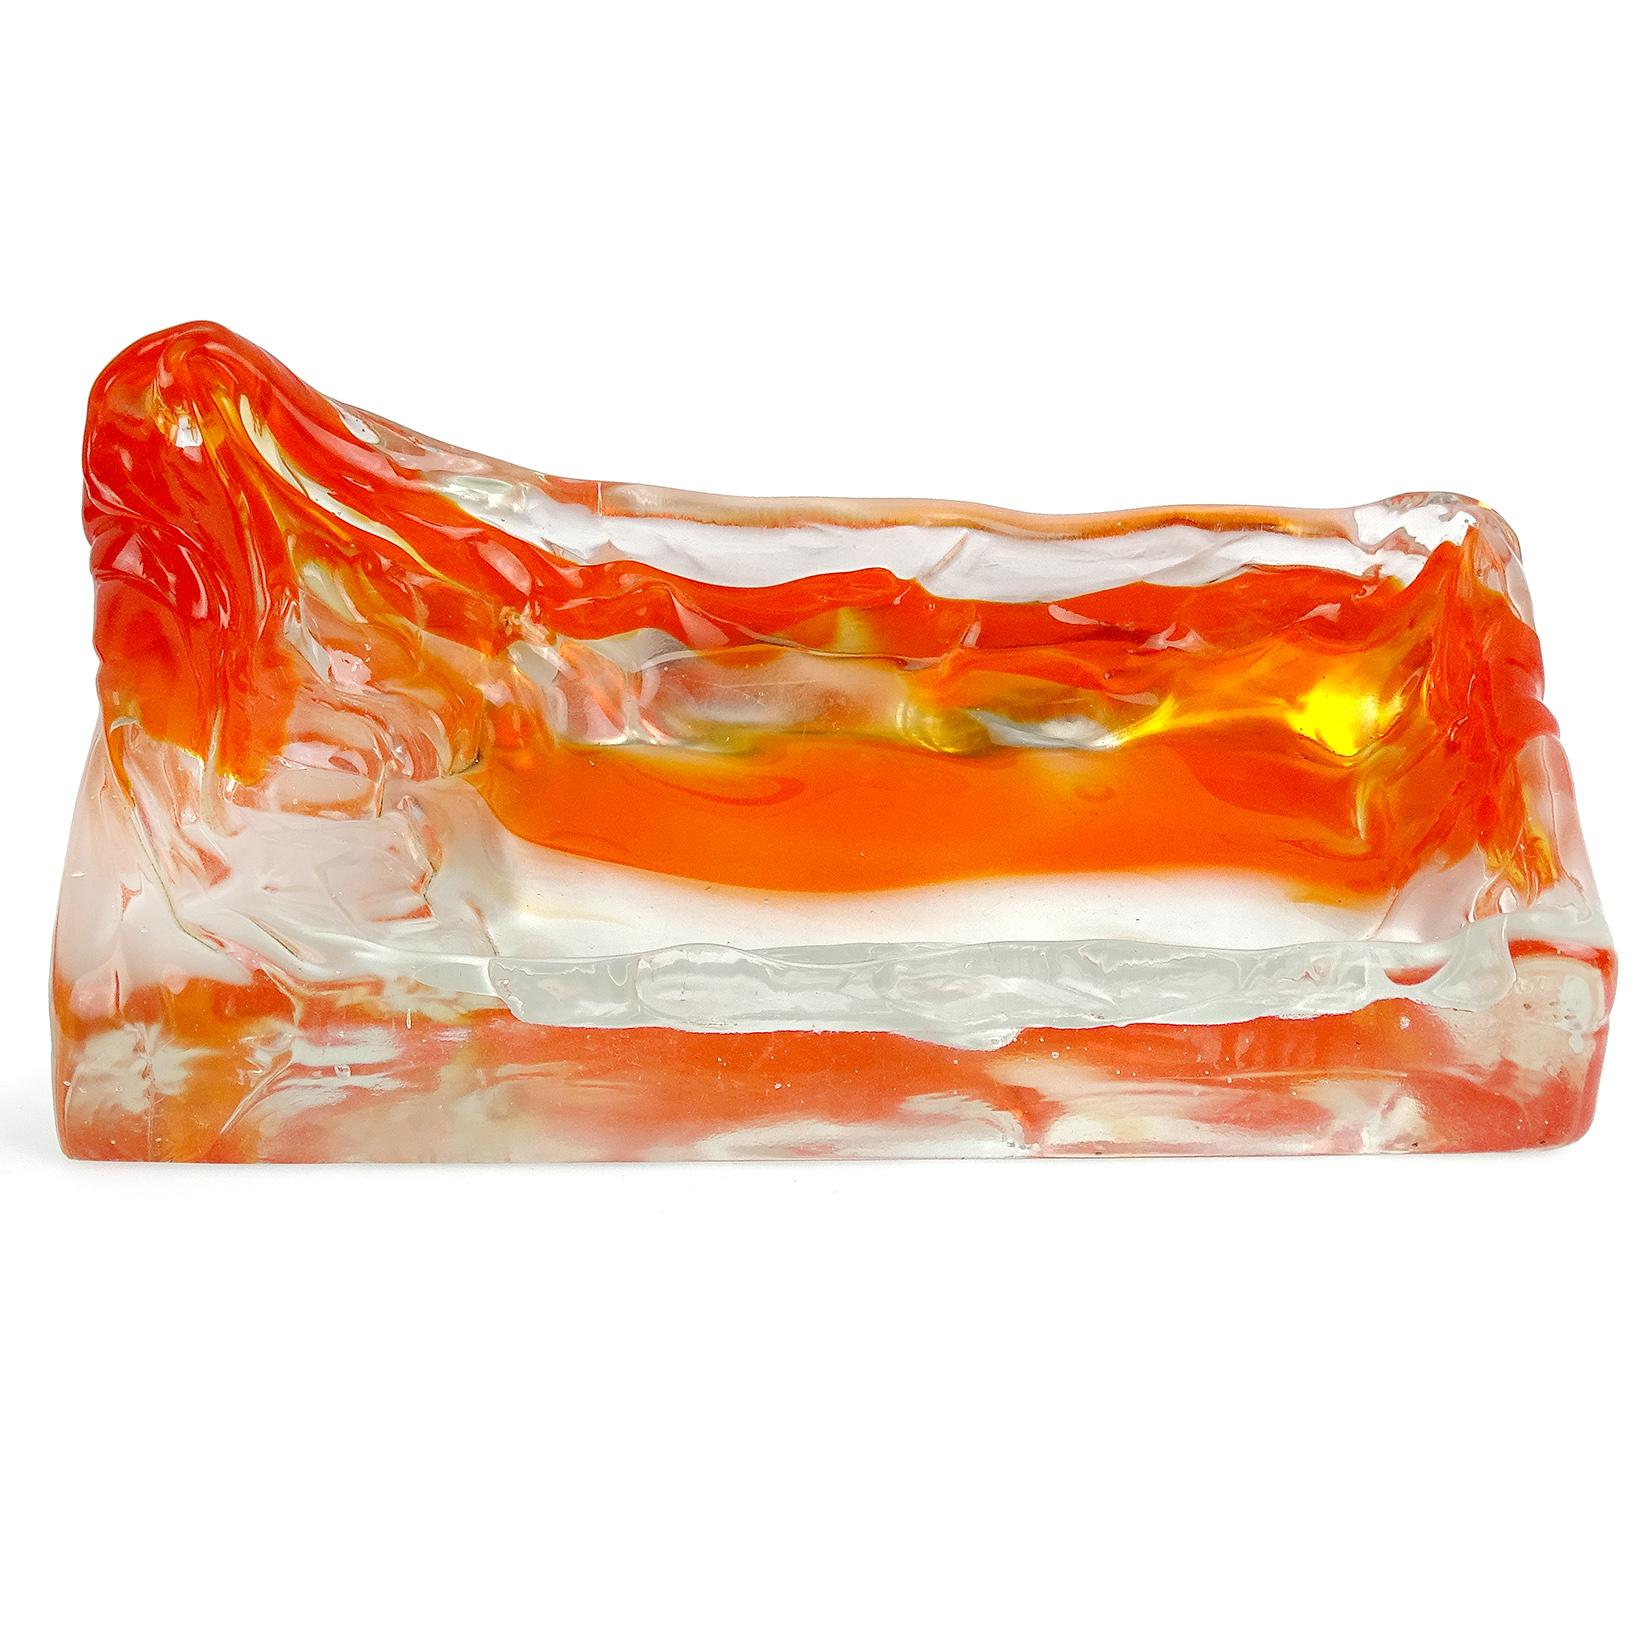 Murano handblown Sommerso red orange and clear Italian art glass bowl / tray. Documented to the Salviati company. This bowl is reminiscent of a mountain volcano with flowing lava. Unusual piece. Measures 9 1/4